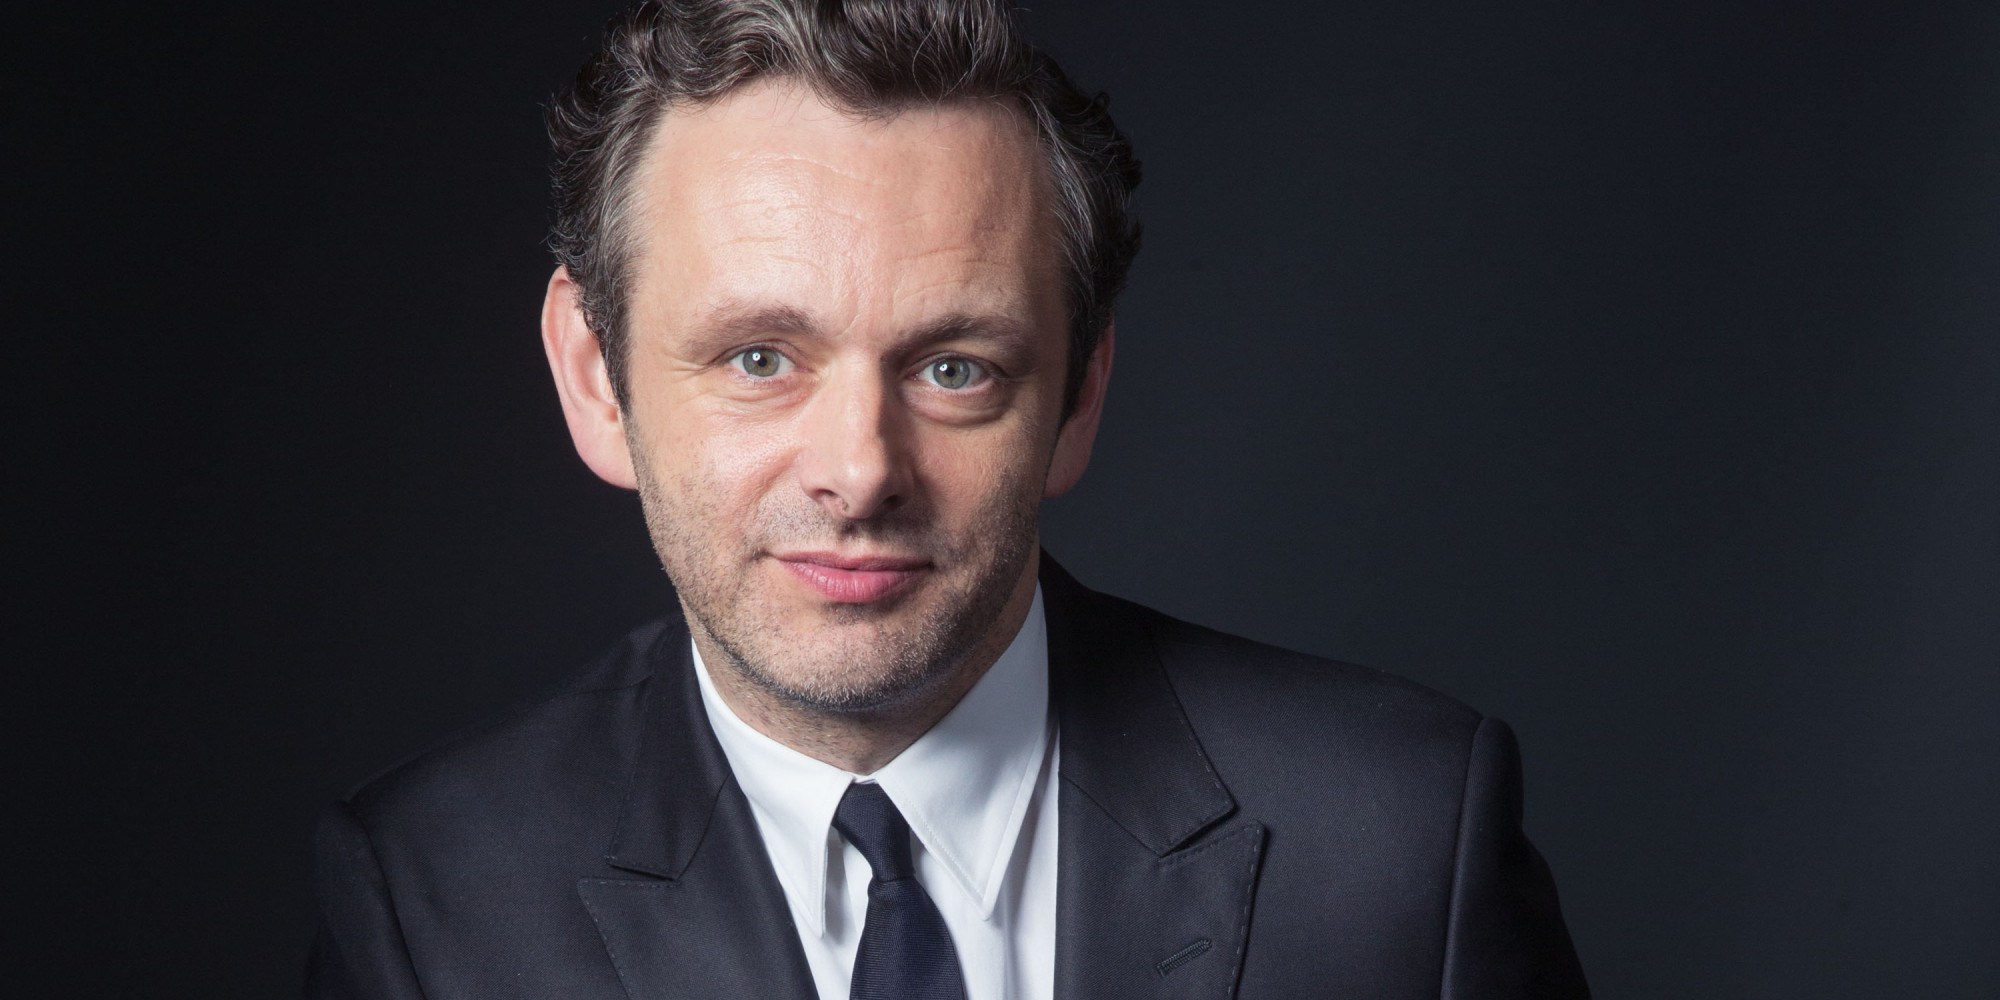 This Aug. 27, 2014 photo shows Michael Sheen, star of the Showtime series "Masters of Sex" in New York. (Photo by Victoria Will/Invision/AP)